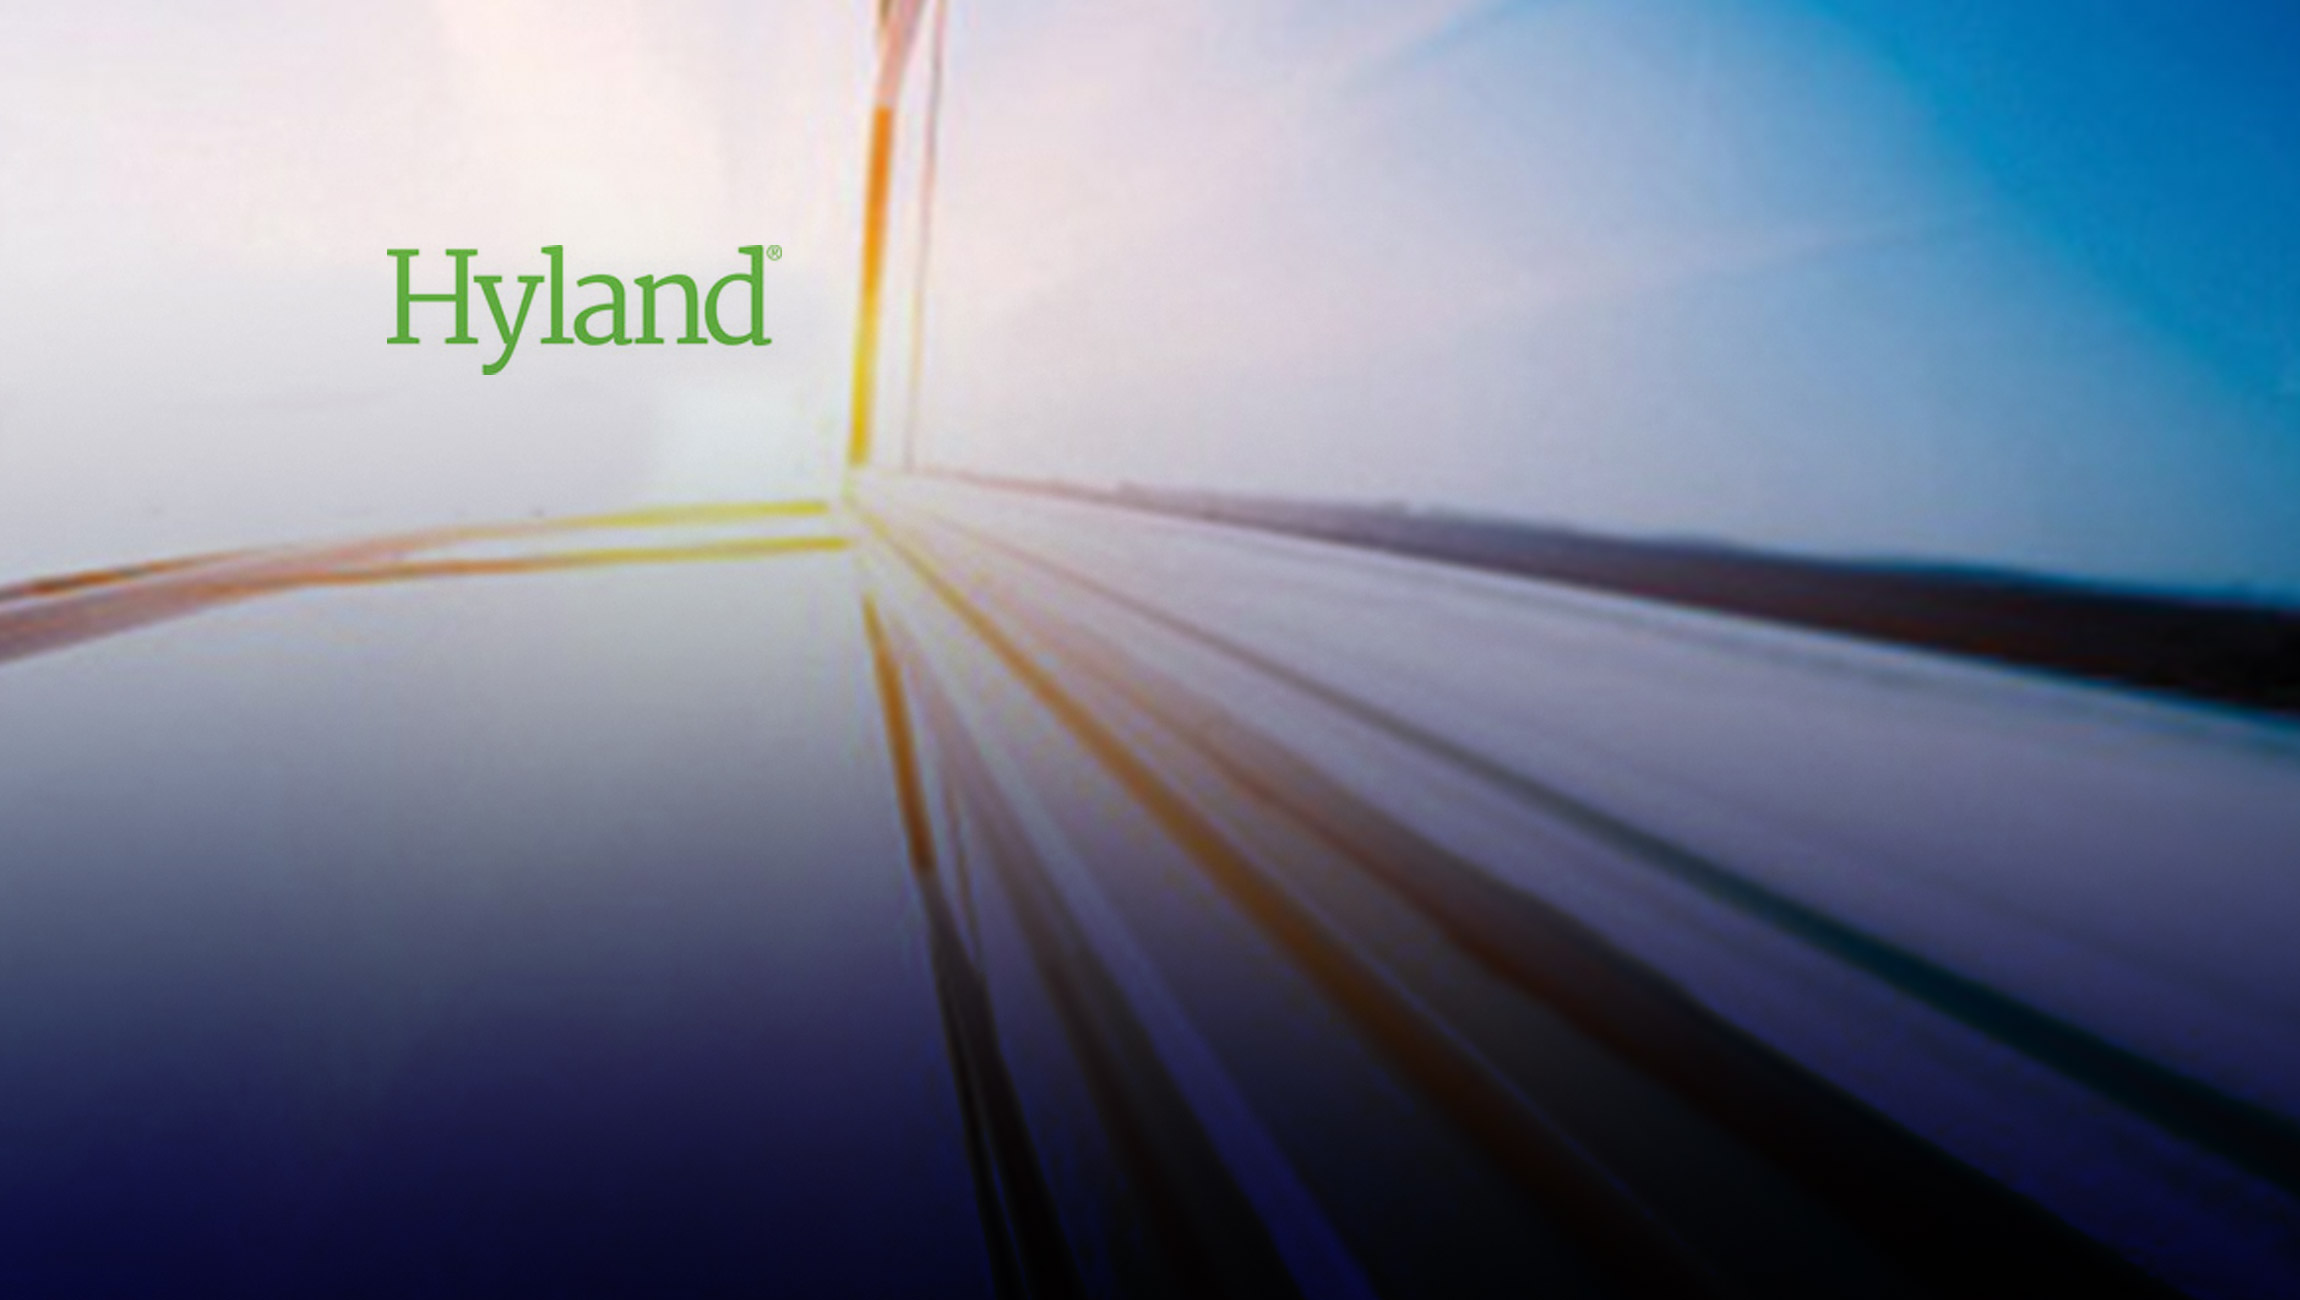 Hyland Releases Alfresco Content Services 7.0